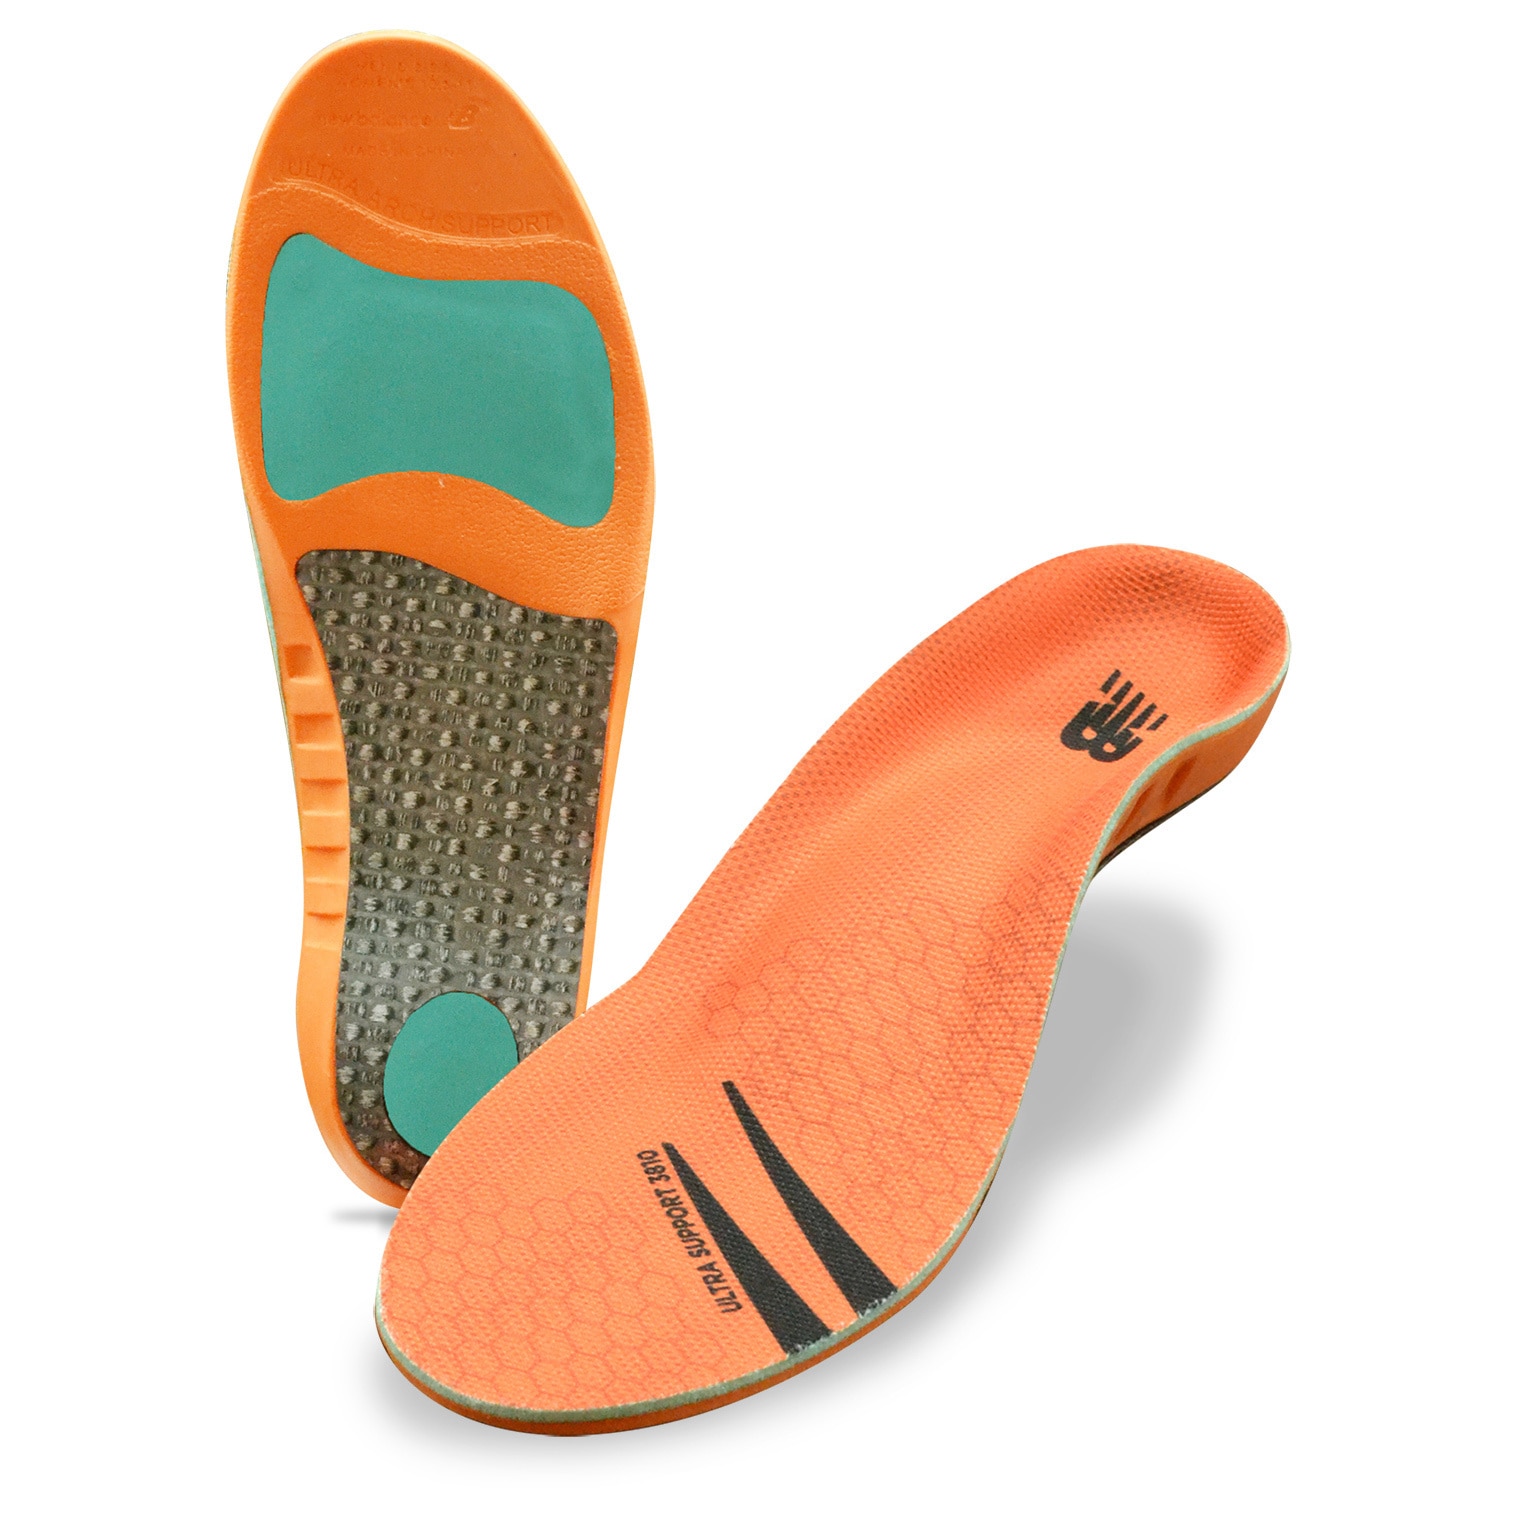 new balance insoles for morton's neuroma